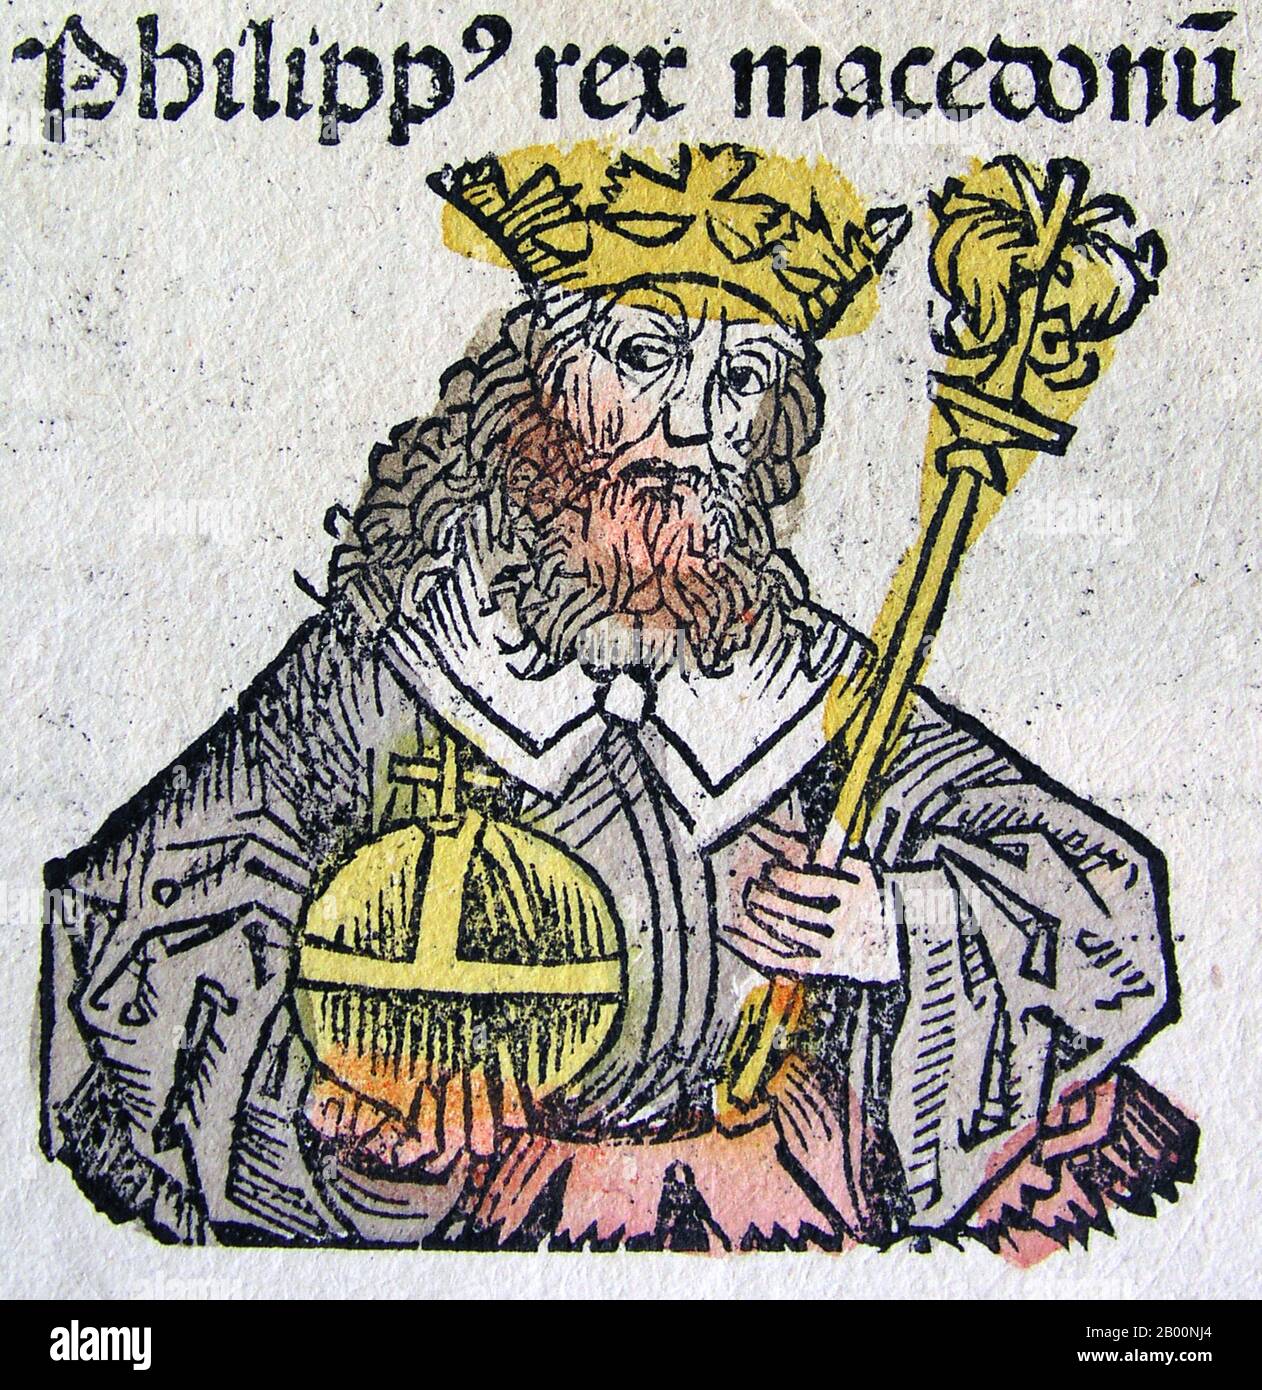 Germany: 'Philip II, King of Macedon'. The Nuremberg Chronicle, by Hartmann Schedel (1440-1514), 1493.  The Nuremberg Chronicle is an illustrated world history. Its structure follows the story of human history as related in the Bible, including the histories of a number of important Western cities. Written in Latin by Hartmann Schedel, with a version in German translation by Georg Alt, it appeared in 1493. It is one of the best-documented early printed books. It is classified as an incunabulum, a book, pamphlet, or broadside that was printed (not handwritten) before the year 1501 in Europe. Stock Photo